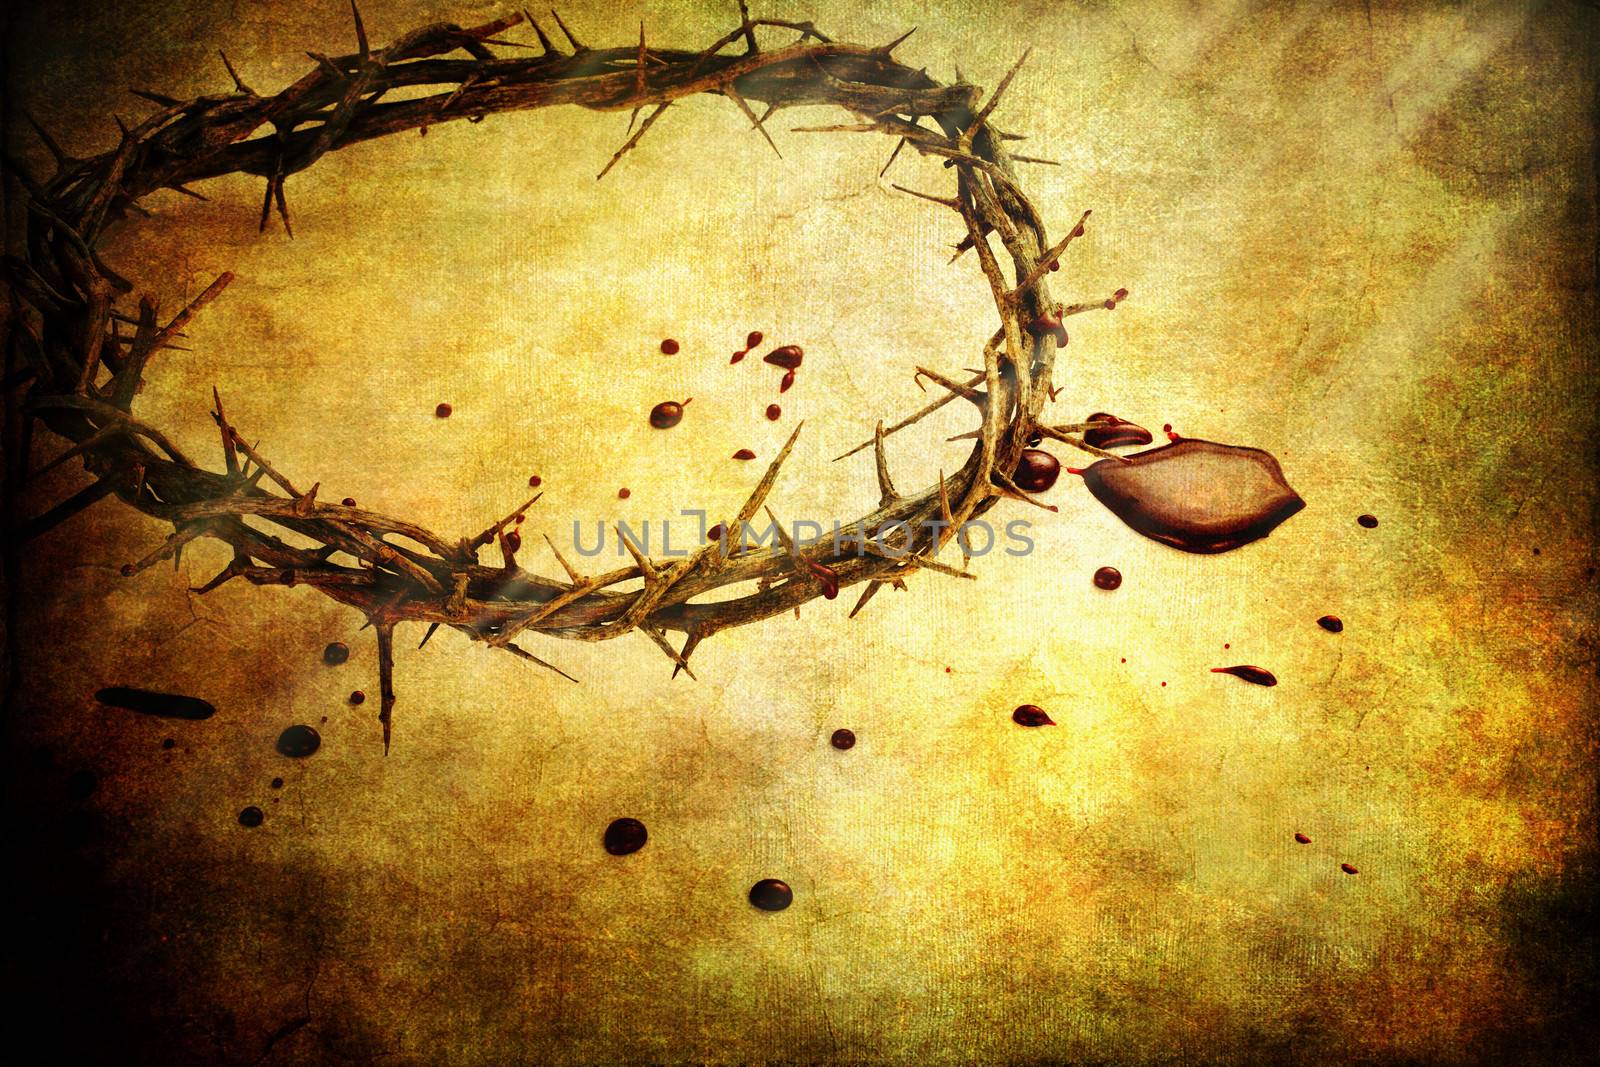 Crown of thorns with blood over textured background.